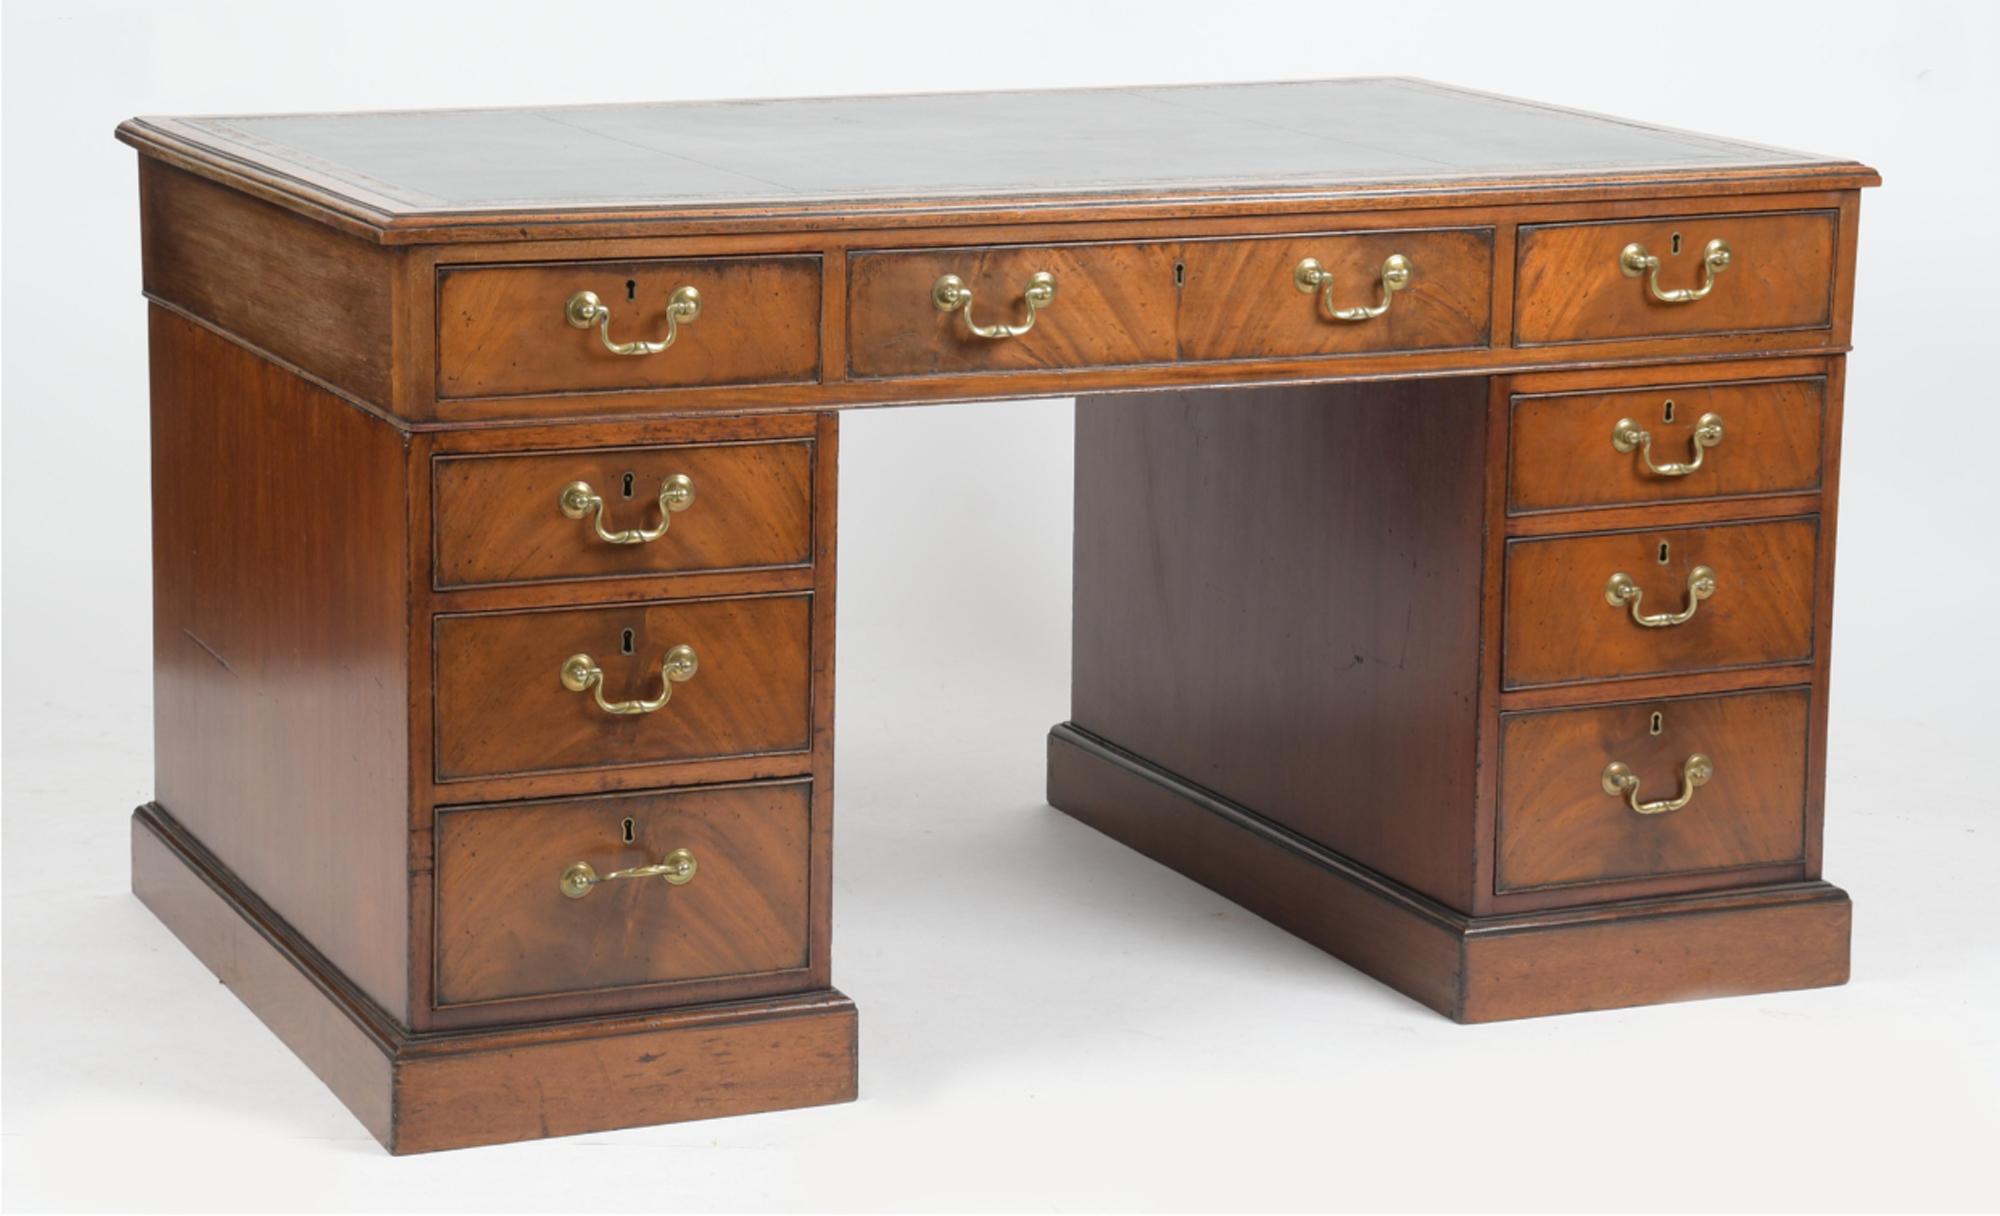 George IV Mahogany Pedestal Partners' Desk,
Circa 1830

The George Iv mahogany partner's desk has a molded rectangular top with a gilt tooled green leather inset writing surface above three frieze drawers to either side, with two banks of drawers of